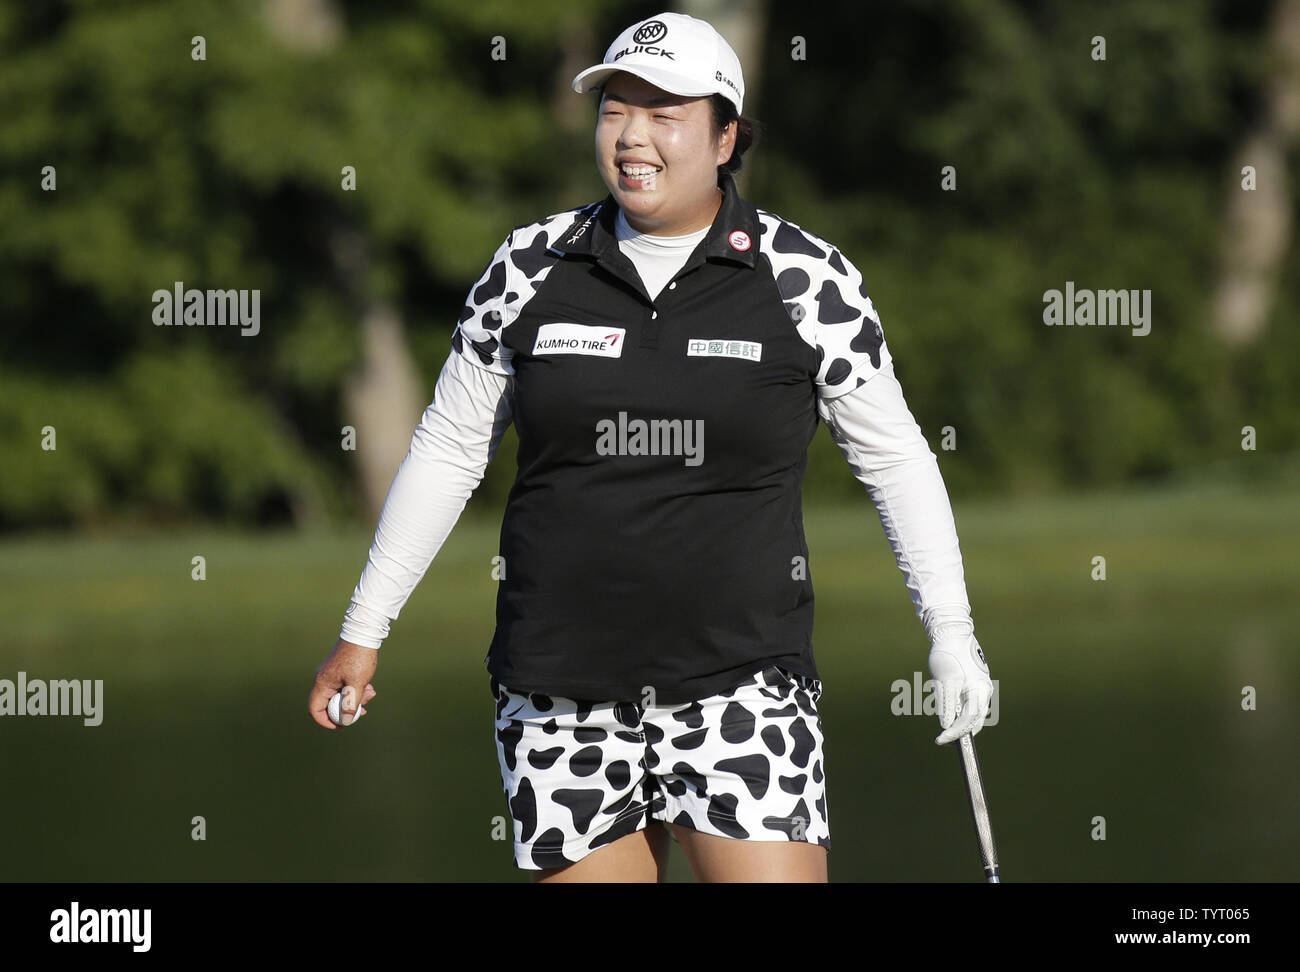 Shanshan Feng of China reacts on the 18th green after her round at Trump National Golf Club in the final round of the LPGA U.S. Women's Open Championship  in Bedminster, NJ on July 14, 2017. Sung Hyun Park wins her first major with a score of 11 under par.      Photo by John Angelillo/UPI Stock Photo